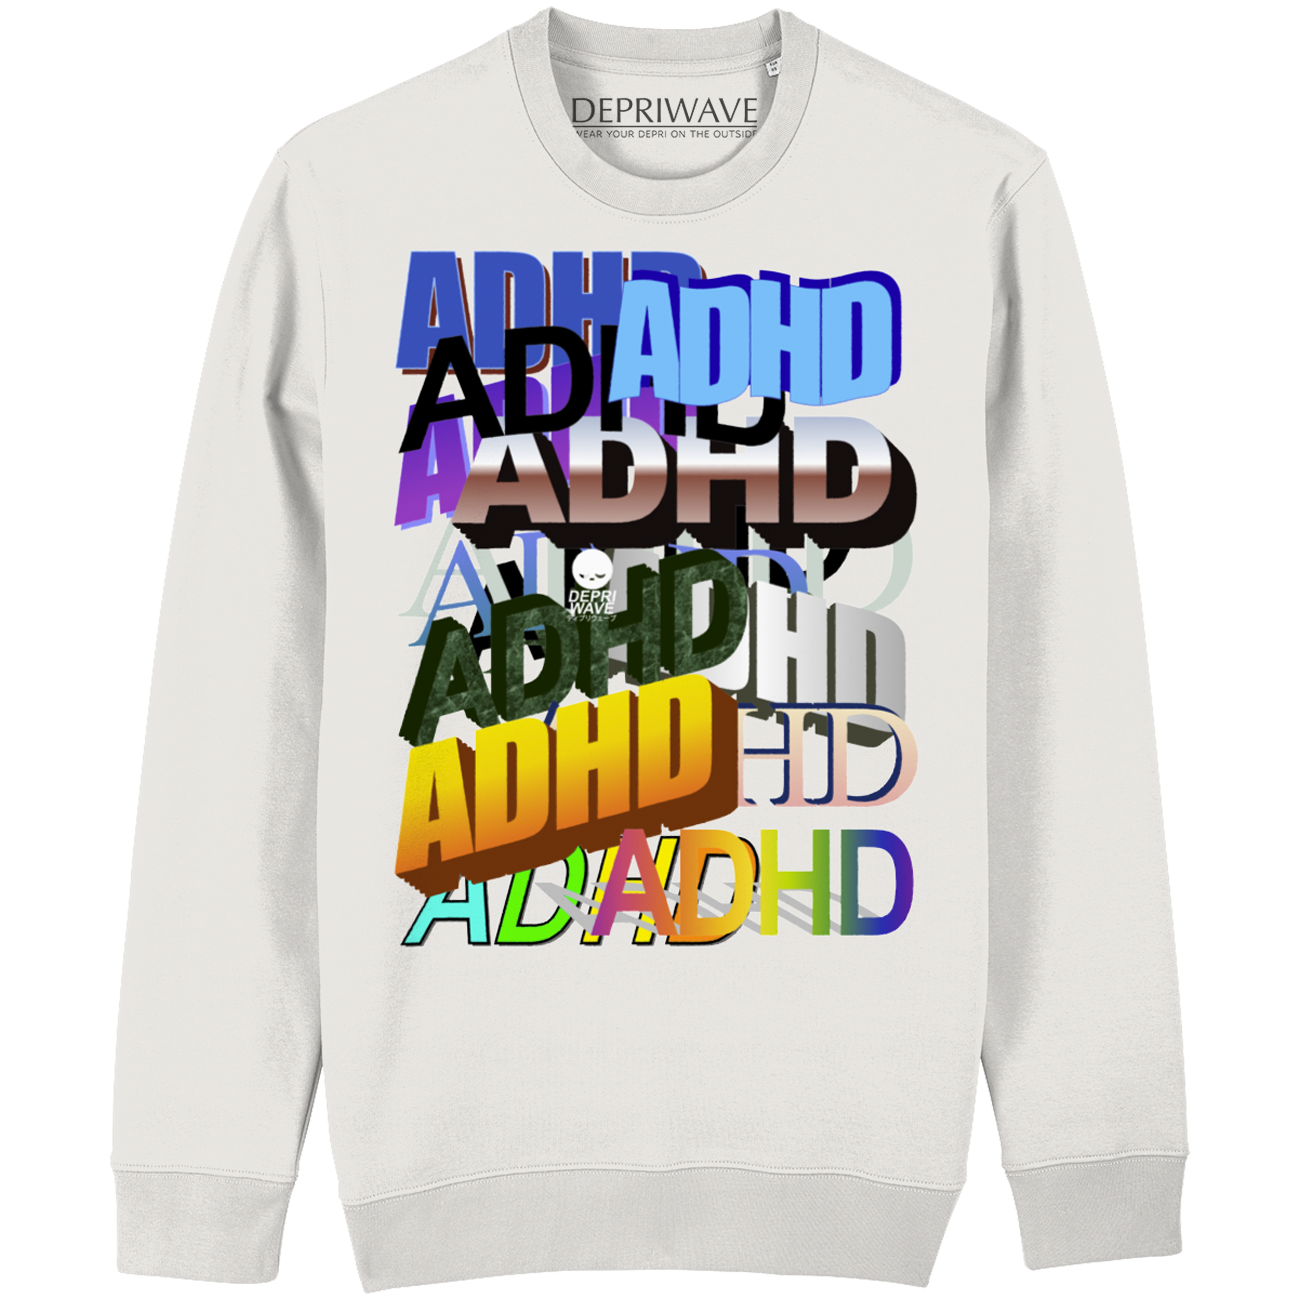 ADHD - sweater vintage wit